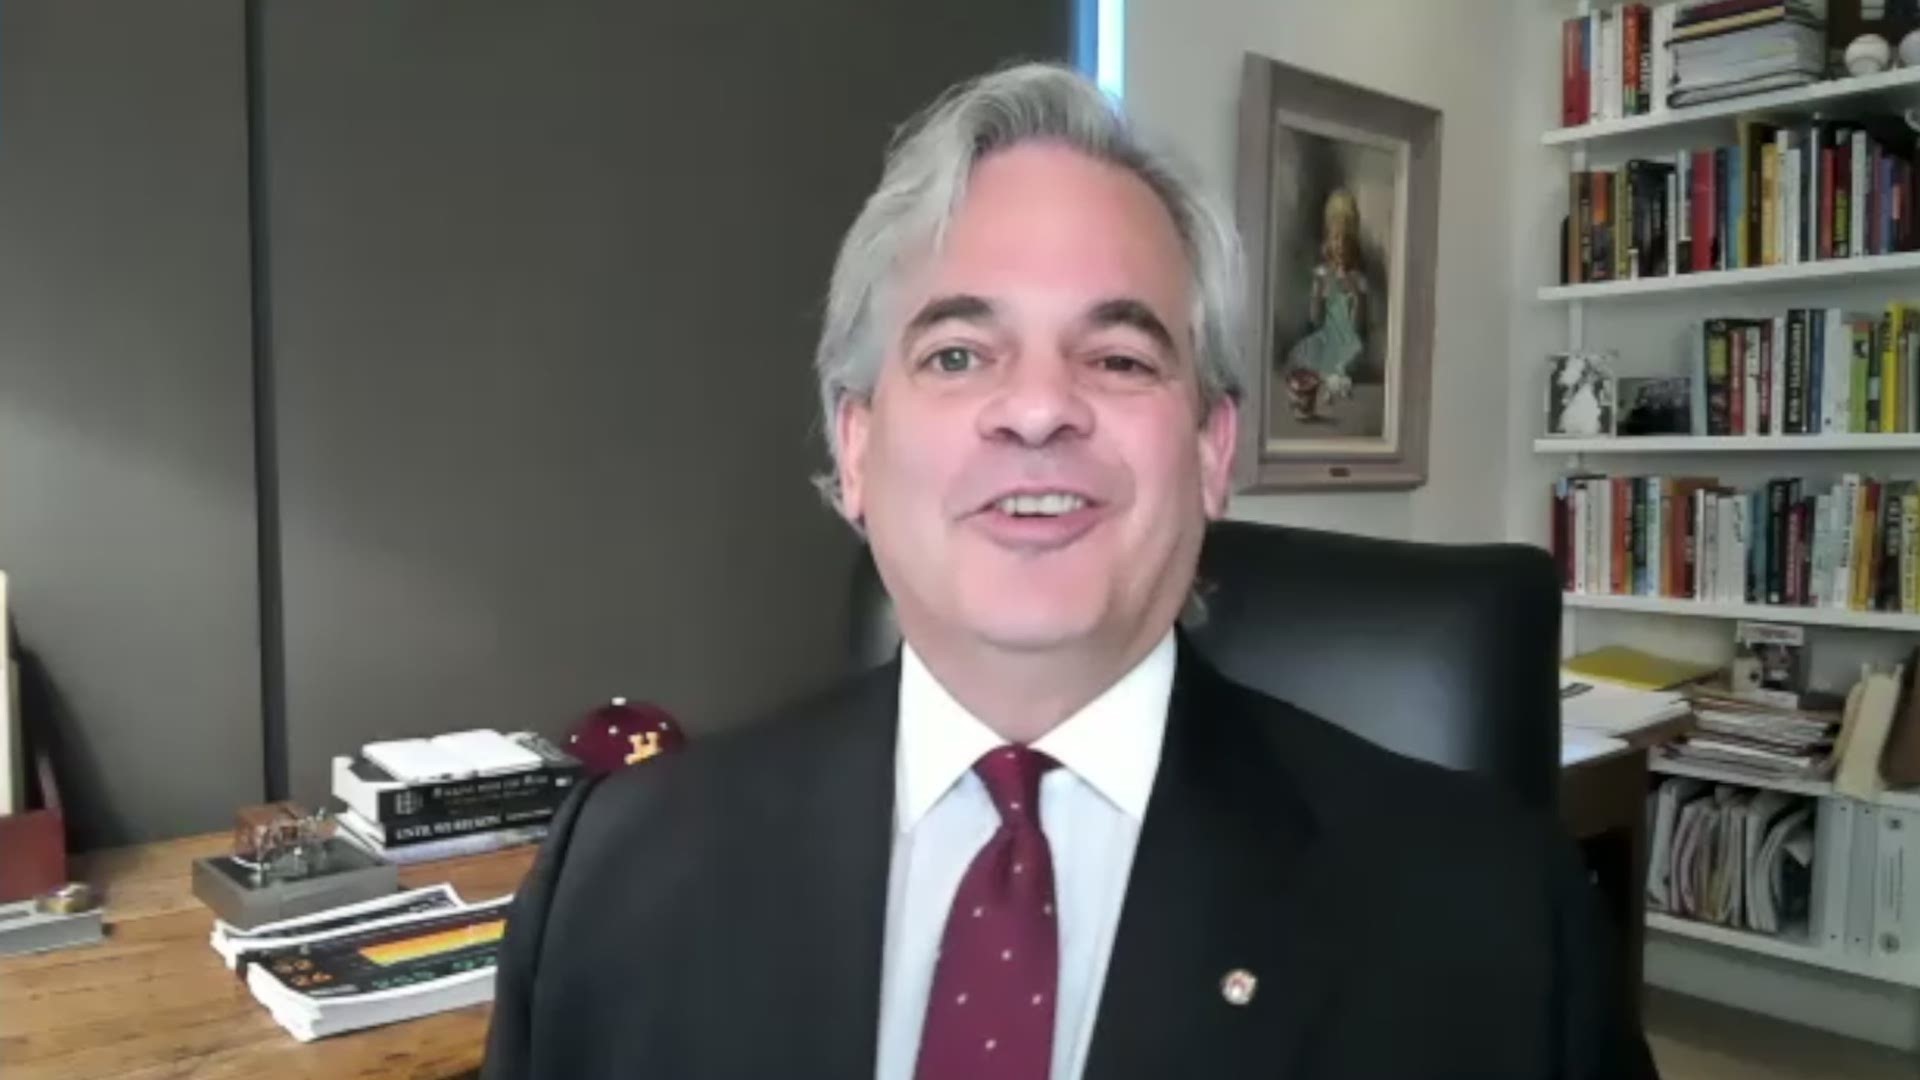 Mayor Adler urged everyone, including Gov. Greg Abbott, to take a close look at the budget that was passed in Austin, in an interview for the Y'all-itics podcast.